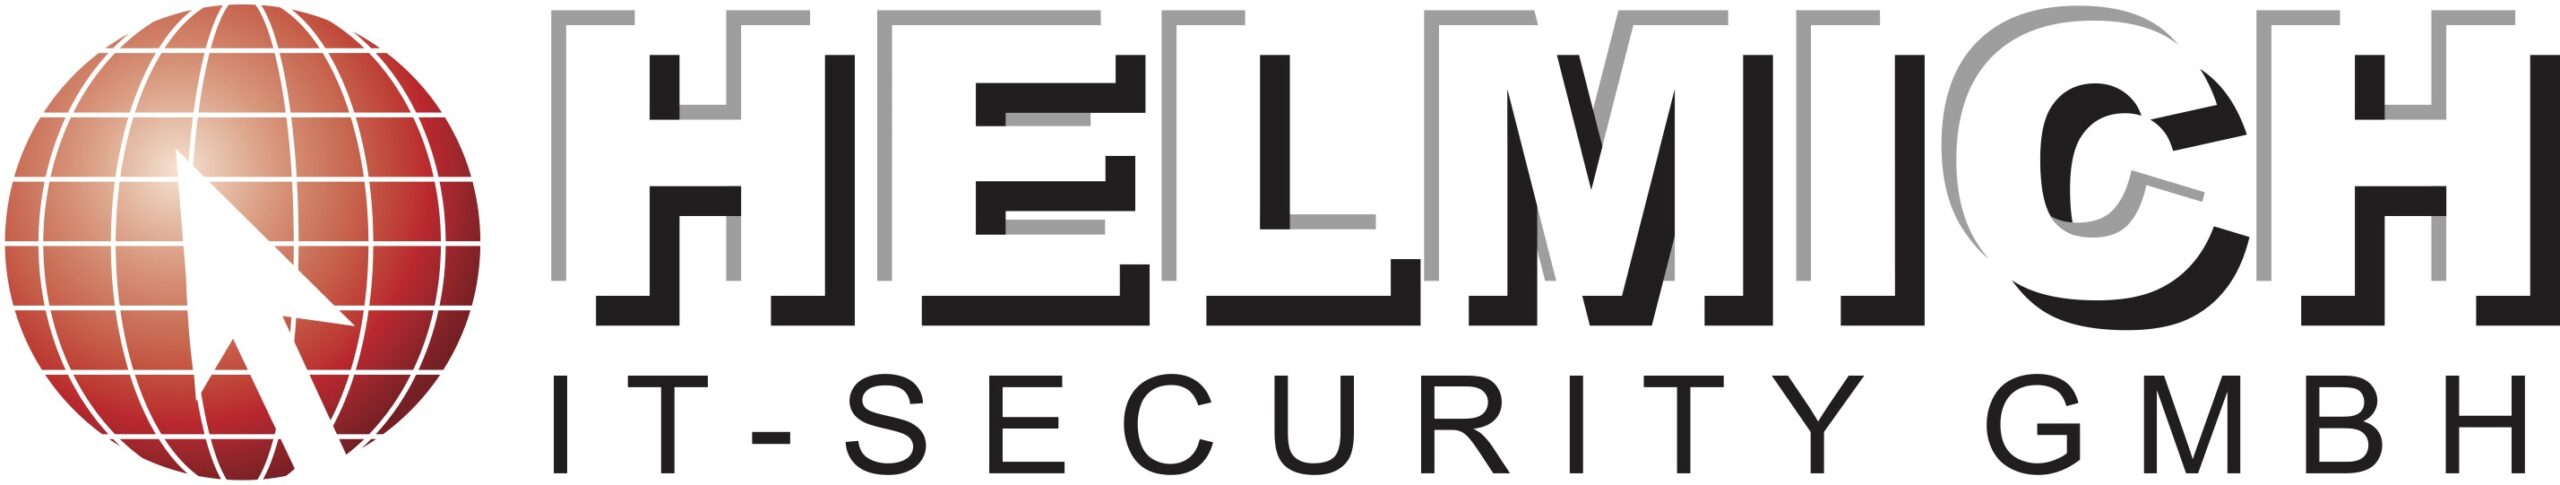 Helmich IT-Security GmbH